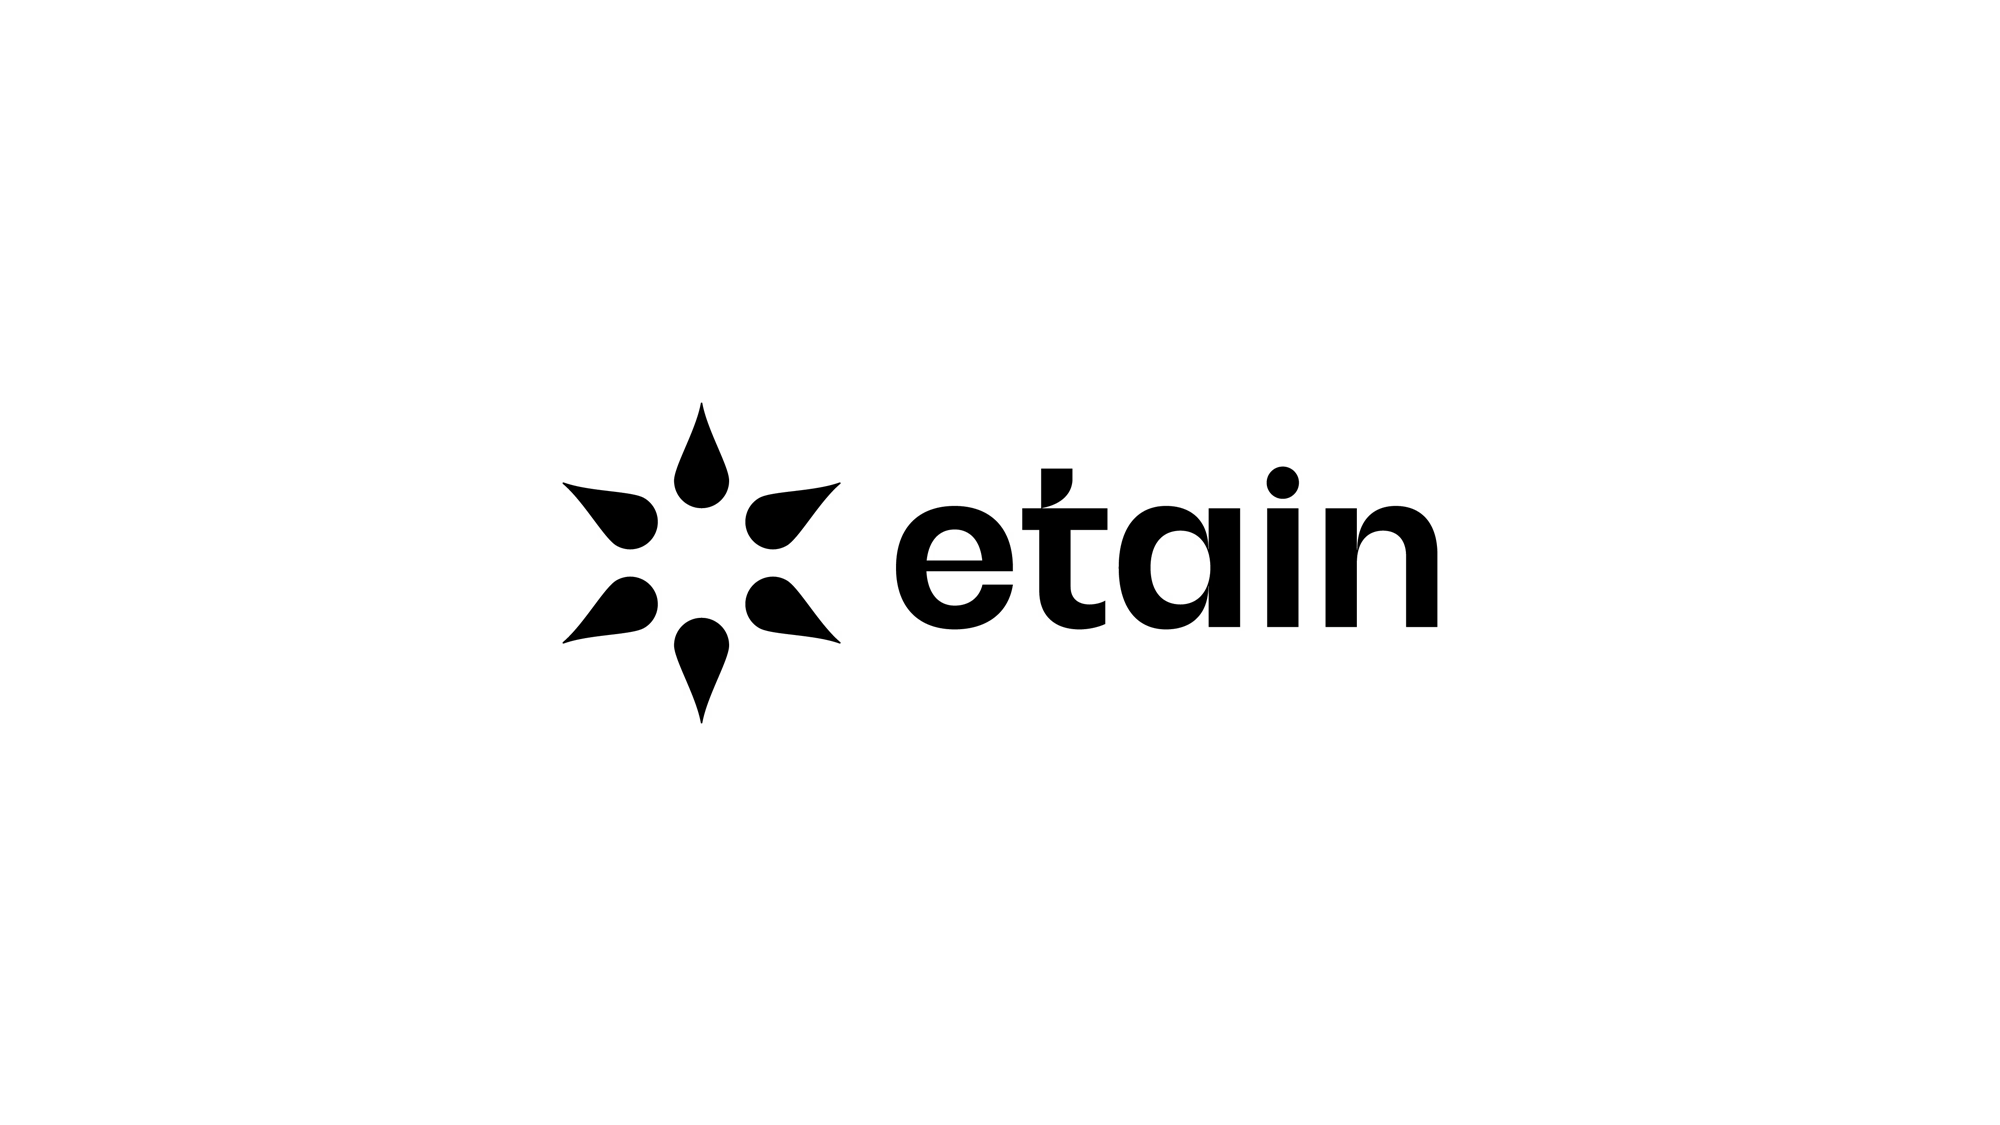 Brand New: New Logo and Identity for Etain by 50,000feet